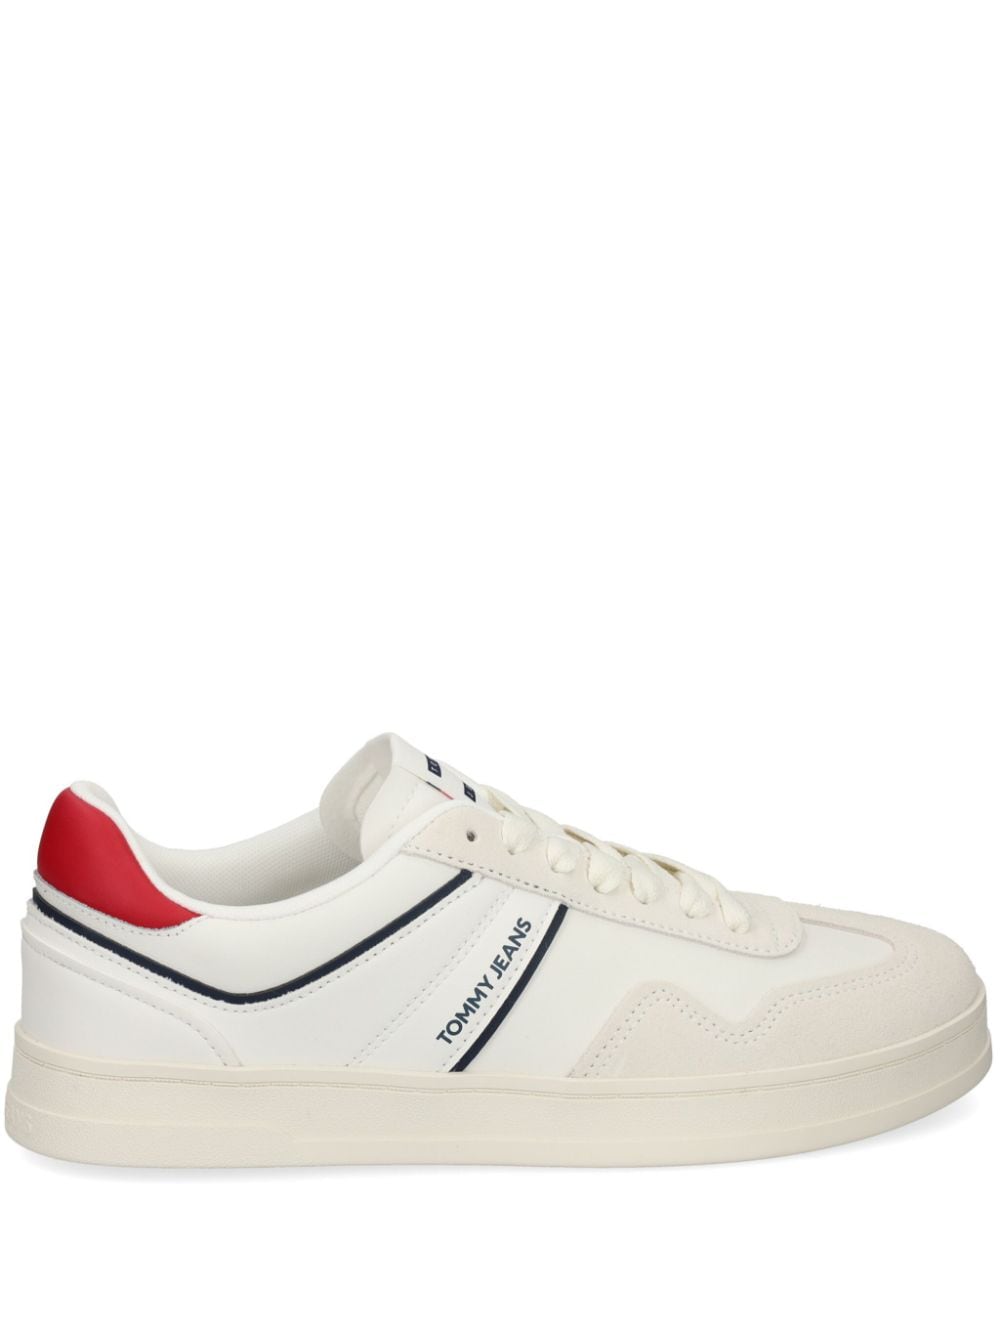 Tommy Jeans Retro Mayka sneakers - White von Tommy Jeans